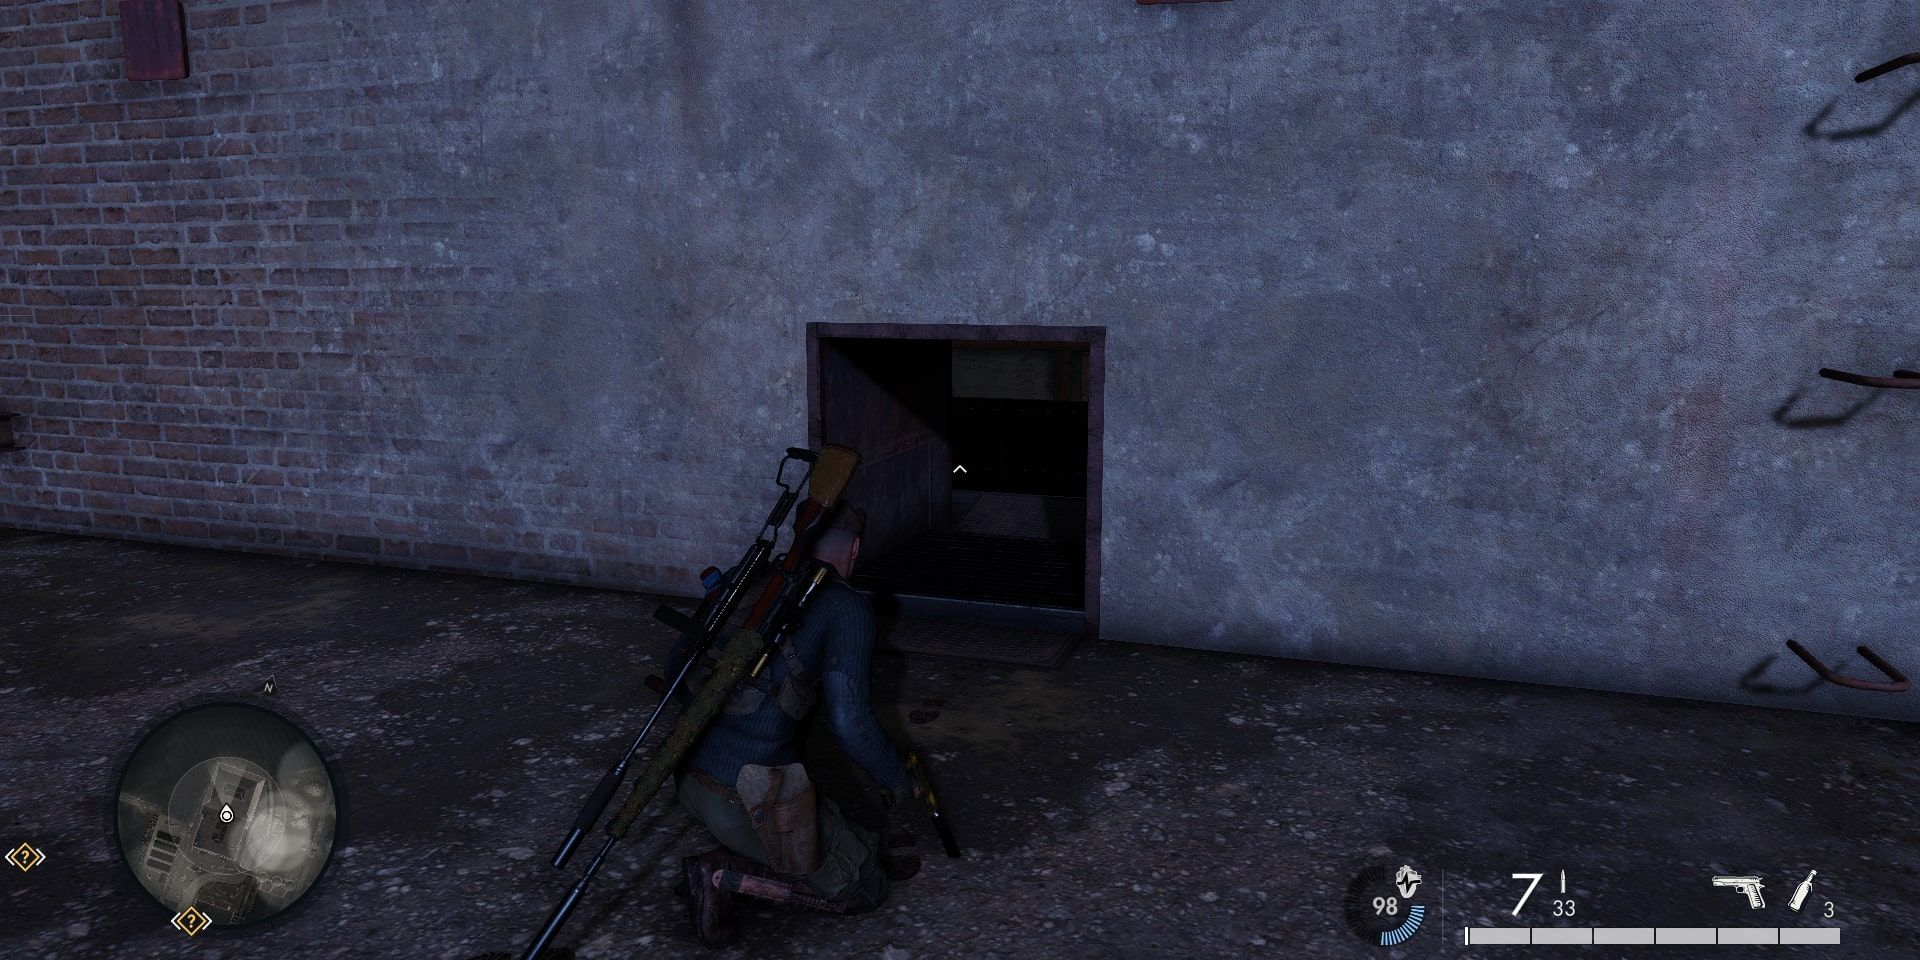 Sniper Elite 5 hidden area War Factory showing the air duct leading to the hidden area